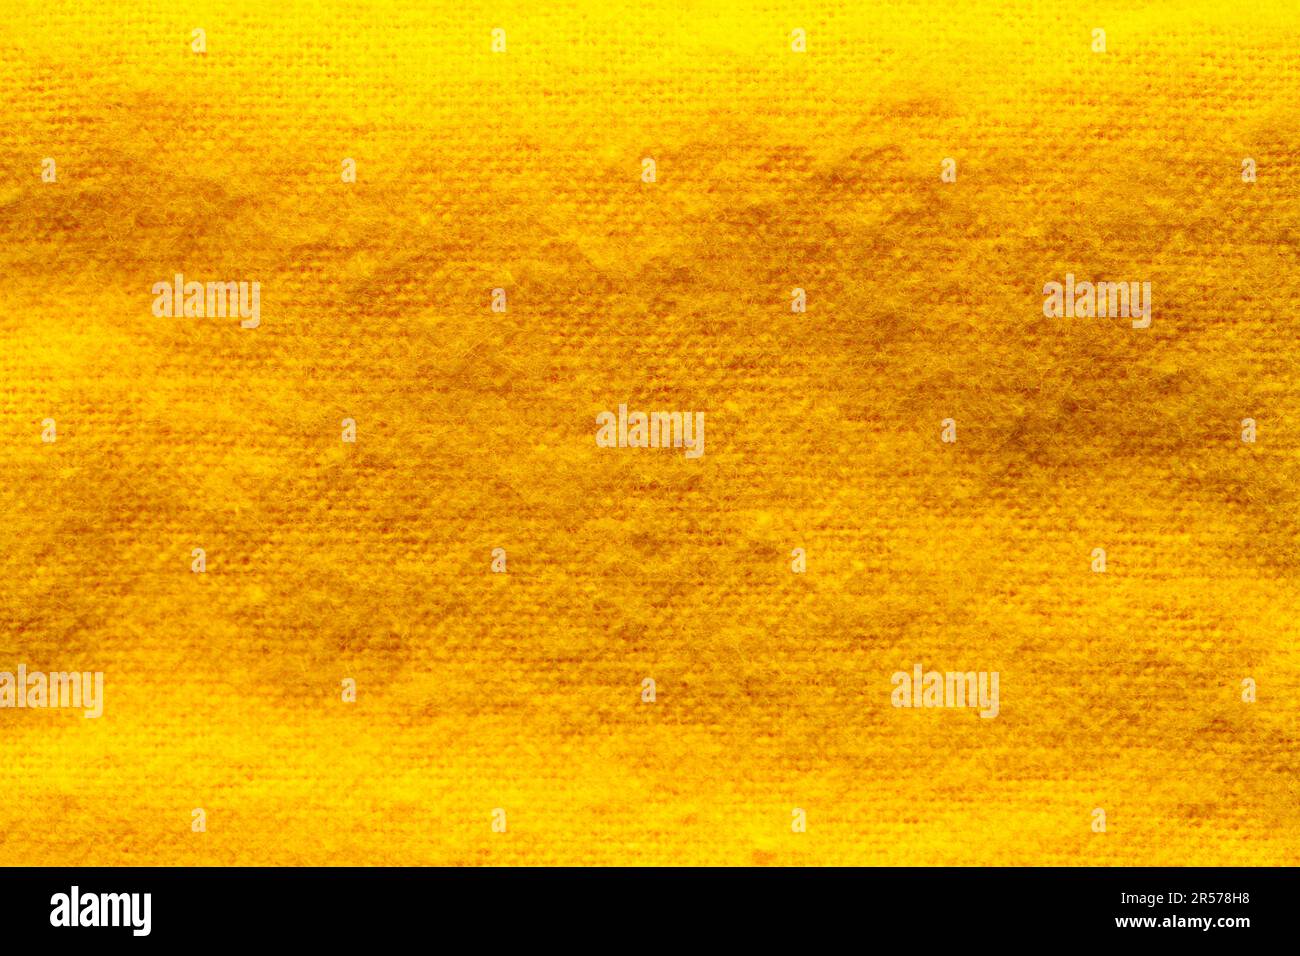 Close Up of Yellow Cotton Fabric Background. Stock Photo